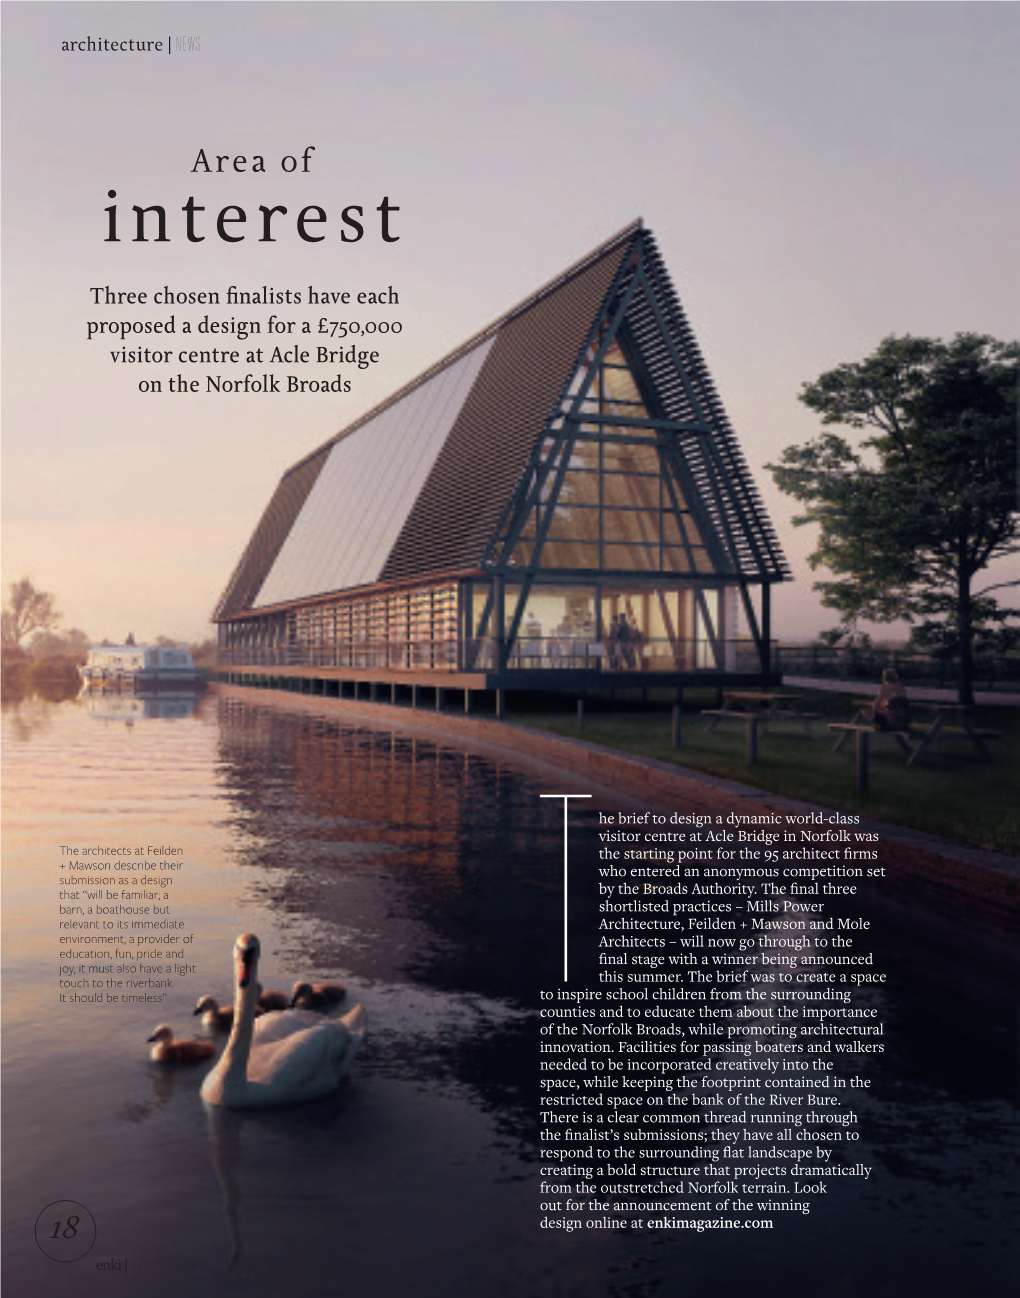 Interest Three Chosen Finalists Have Each Proposed a Design for a £750,000 Visitor Centre at Acle Bridge on the Norfolk Broads